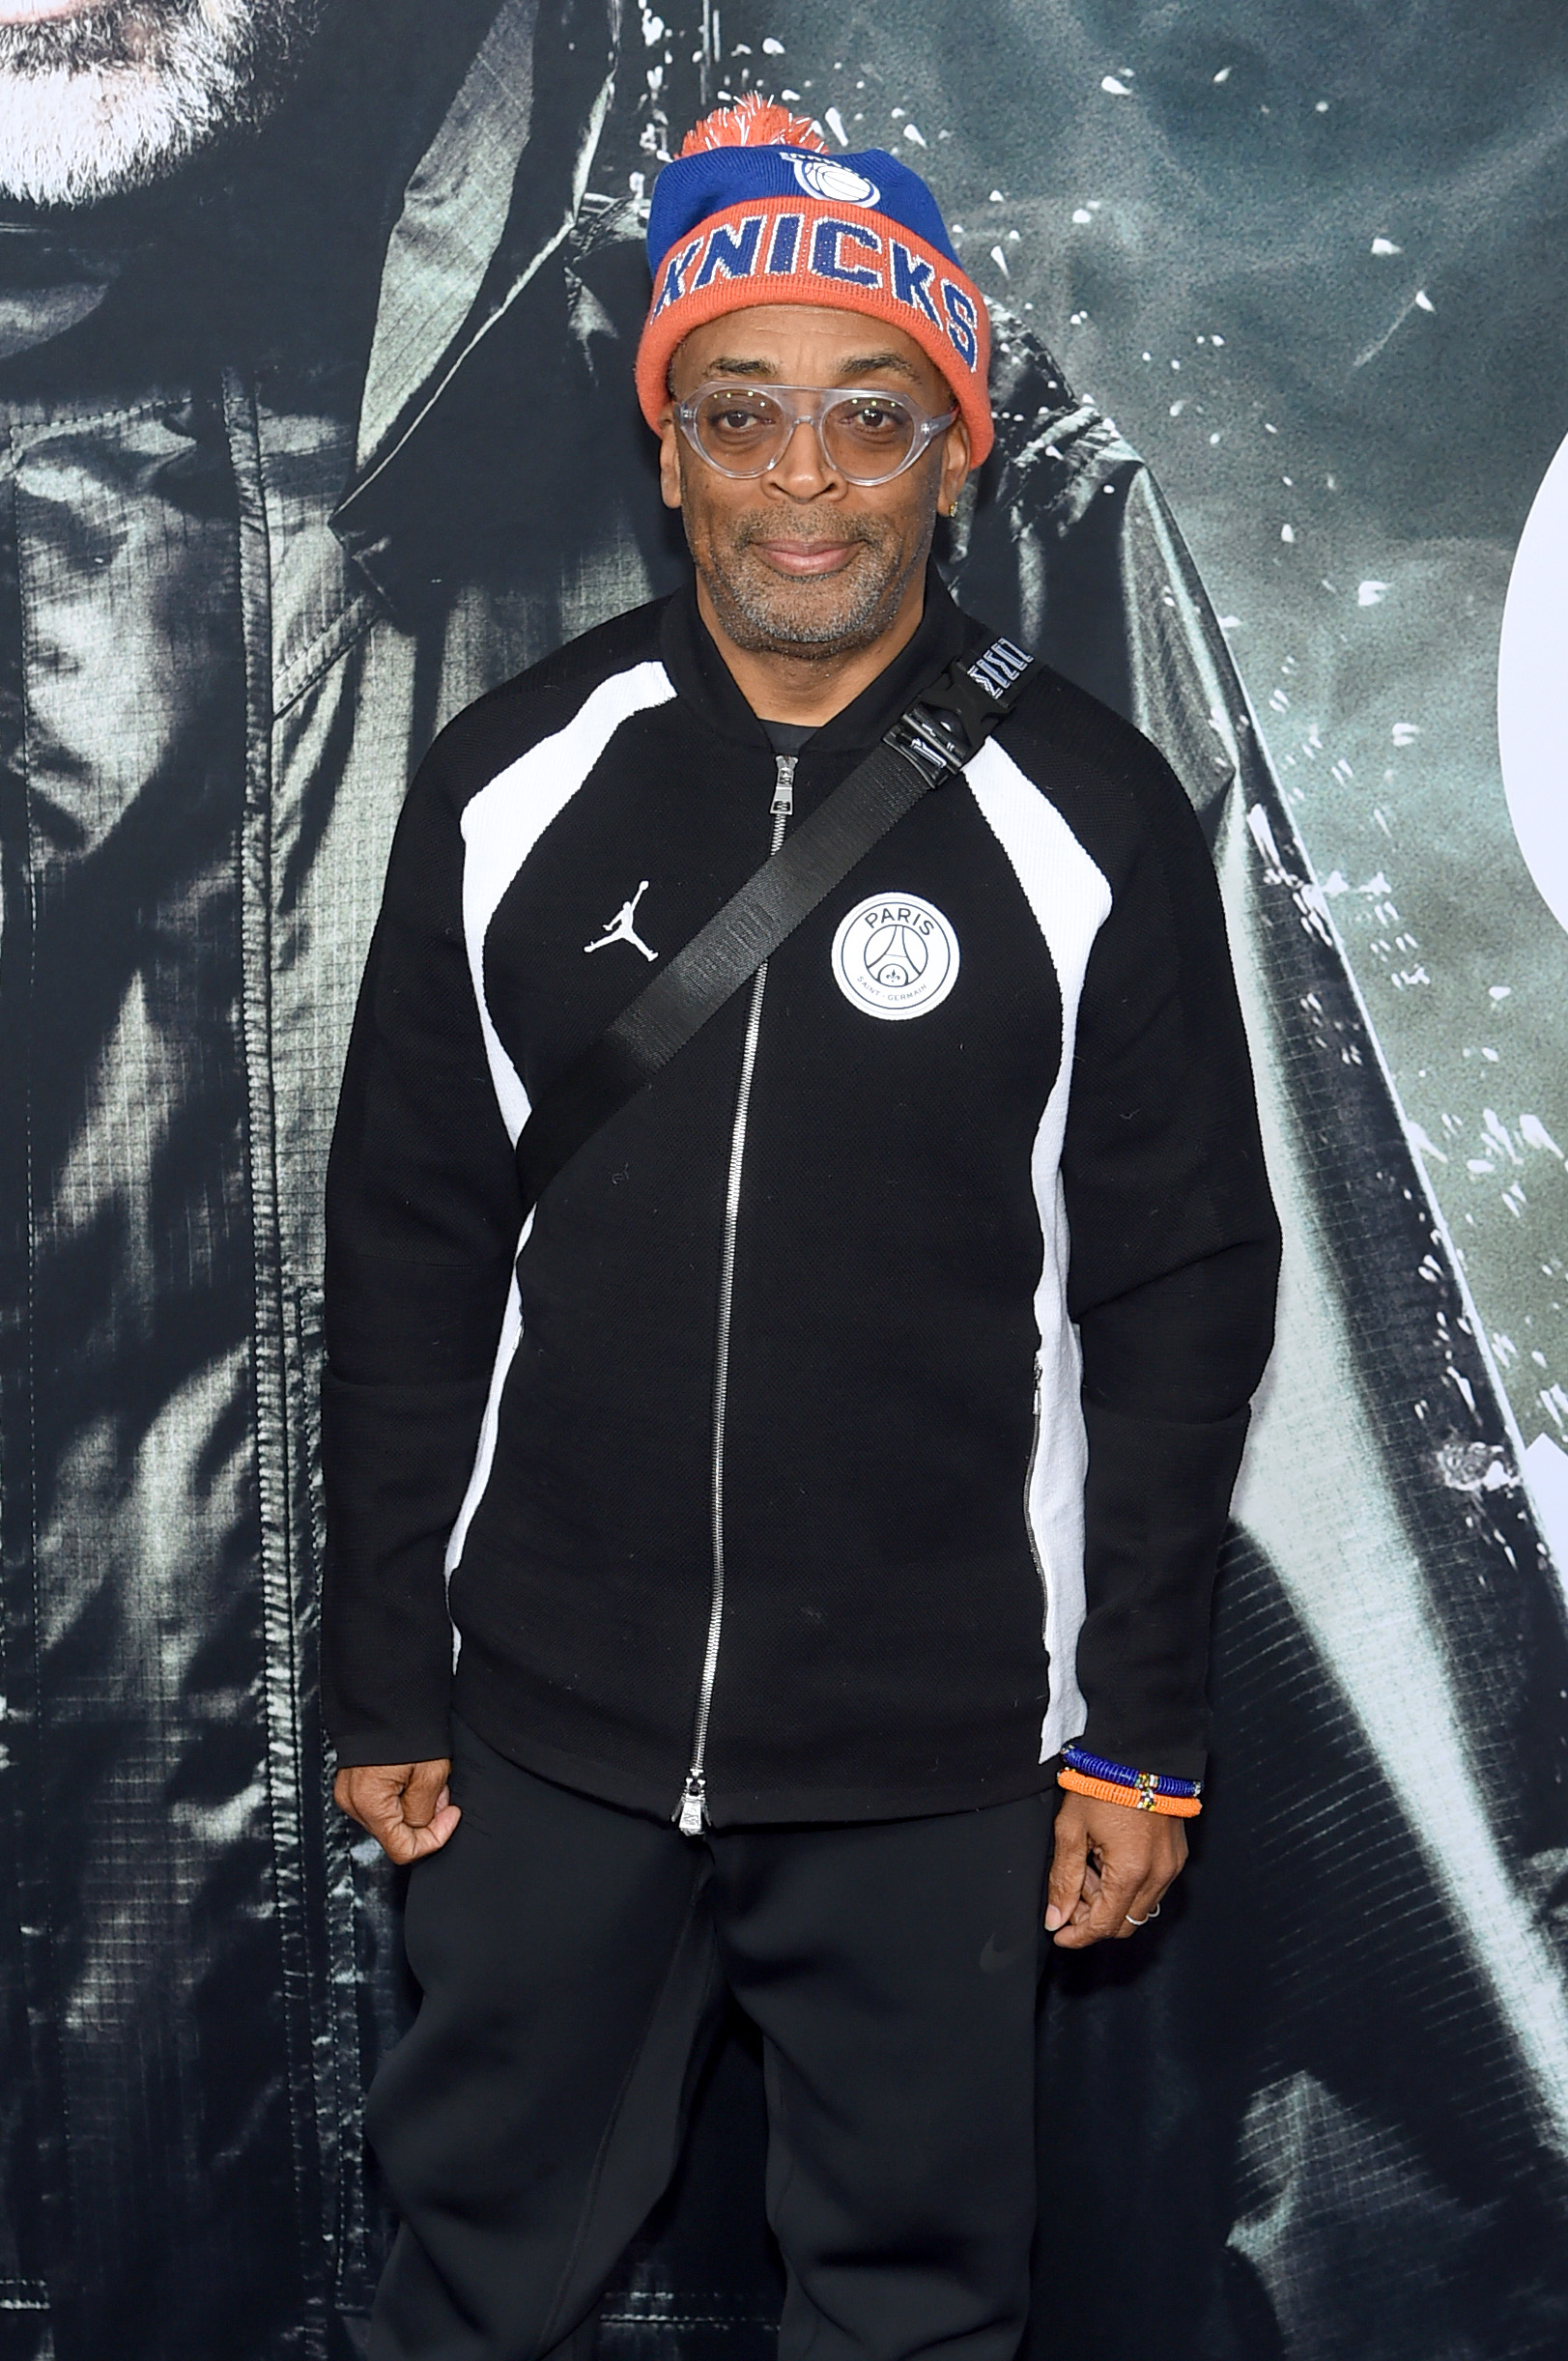 PHOTO: Spike Lee attends the "Glass" Premiere, Jan. 15, 2019, in New York. 